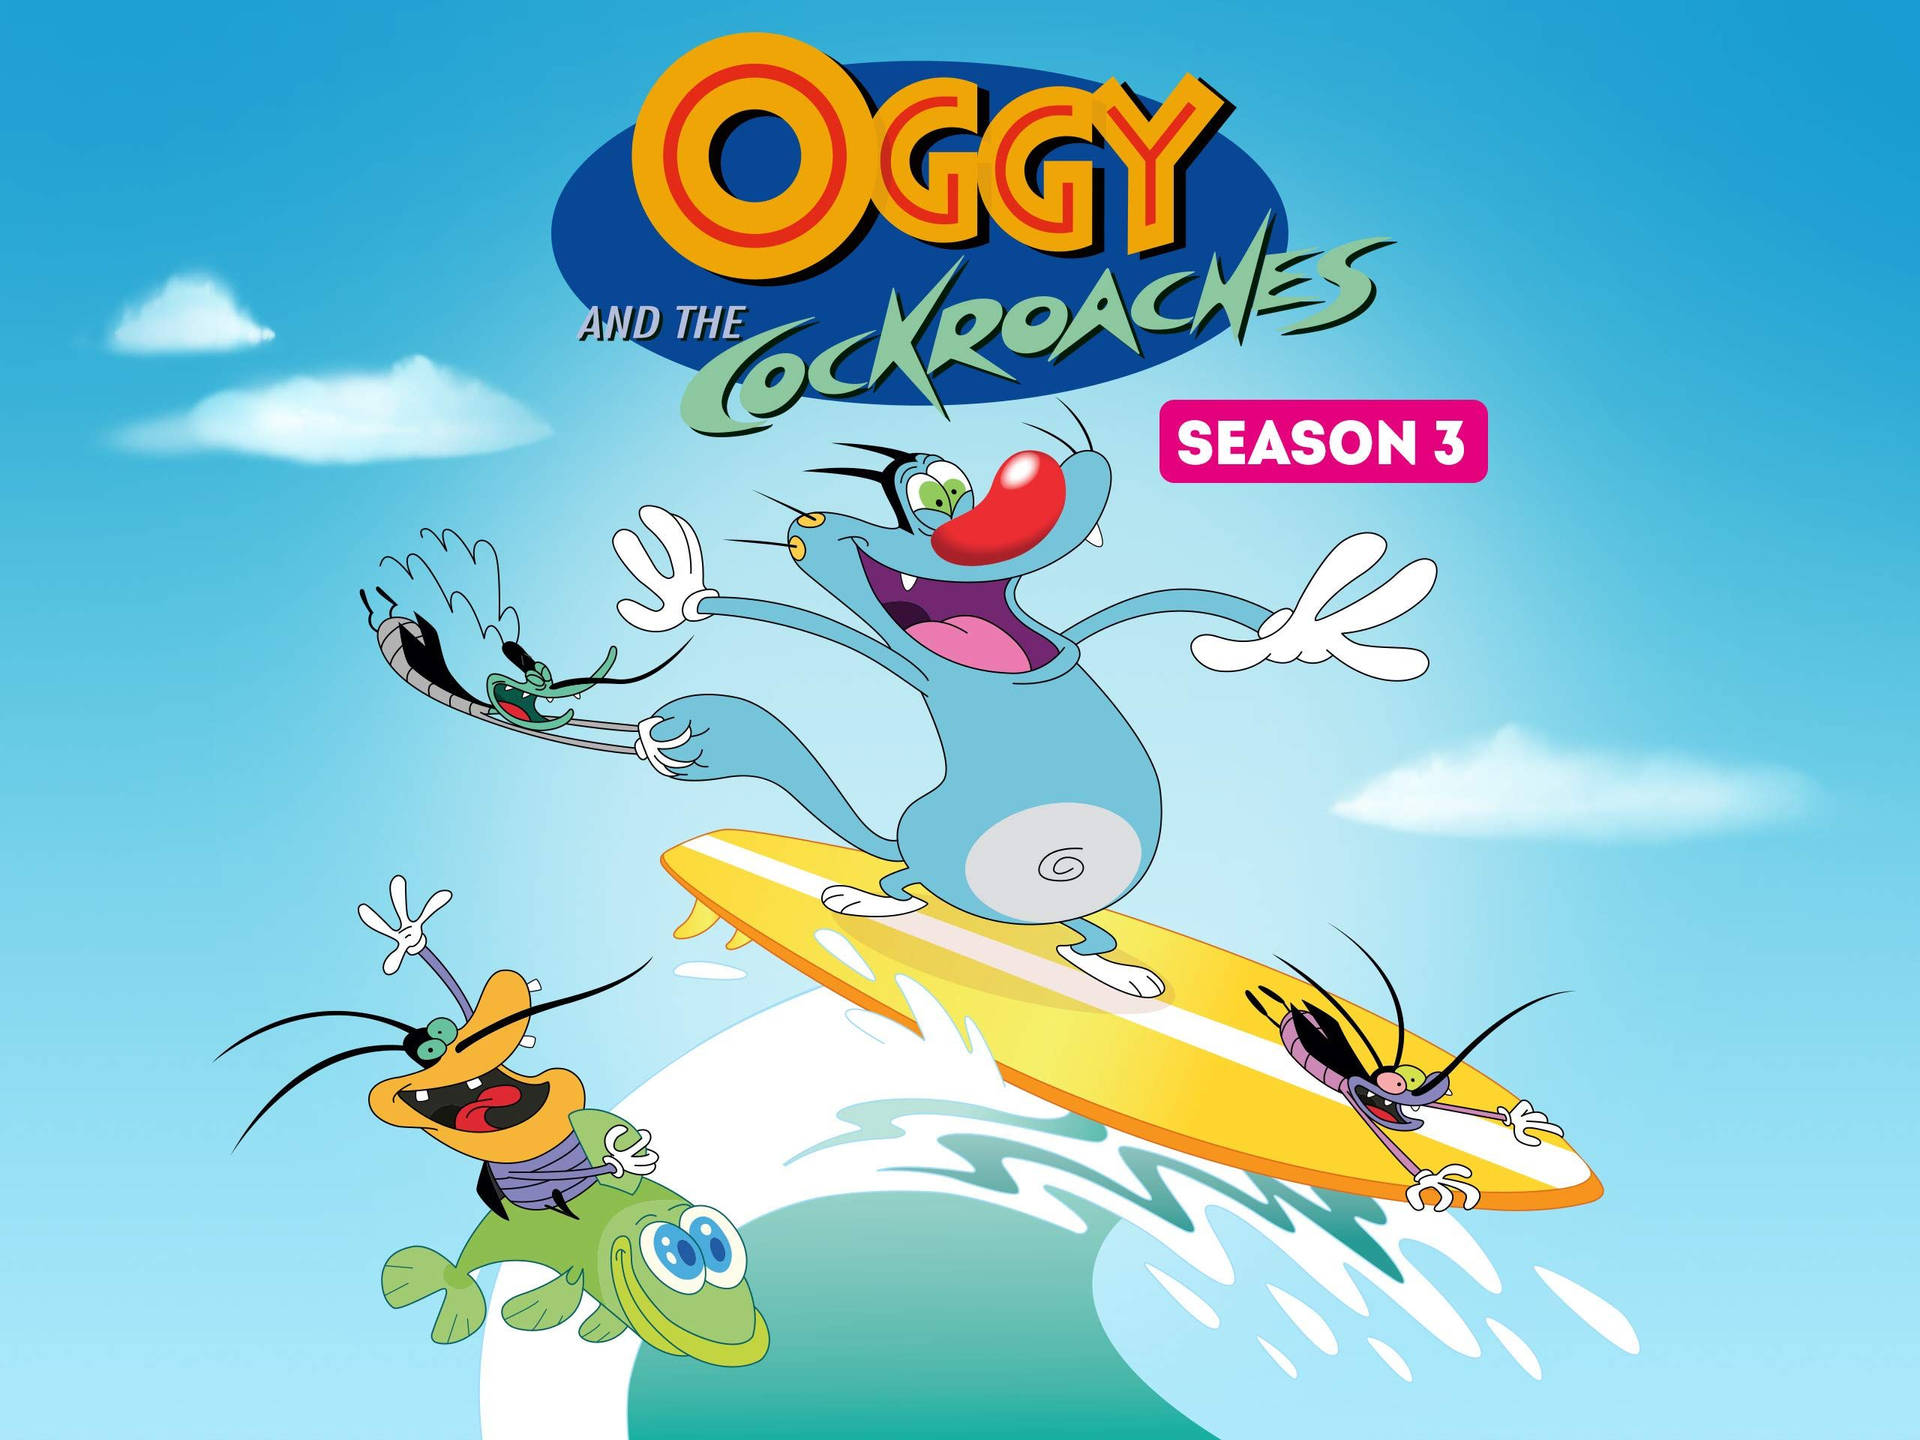 Oggy And The Cockroaches Season 3 Background